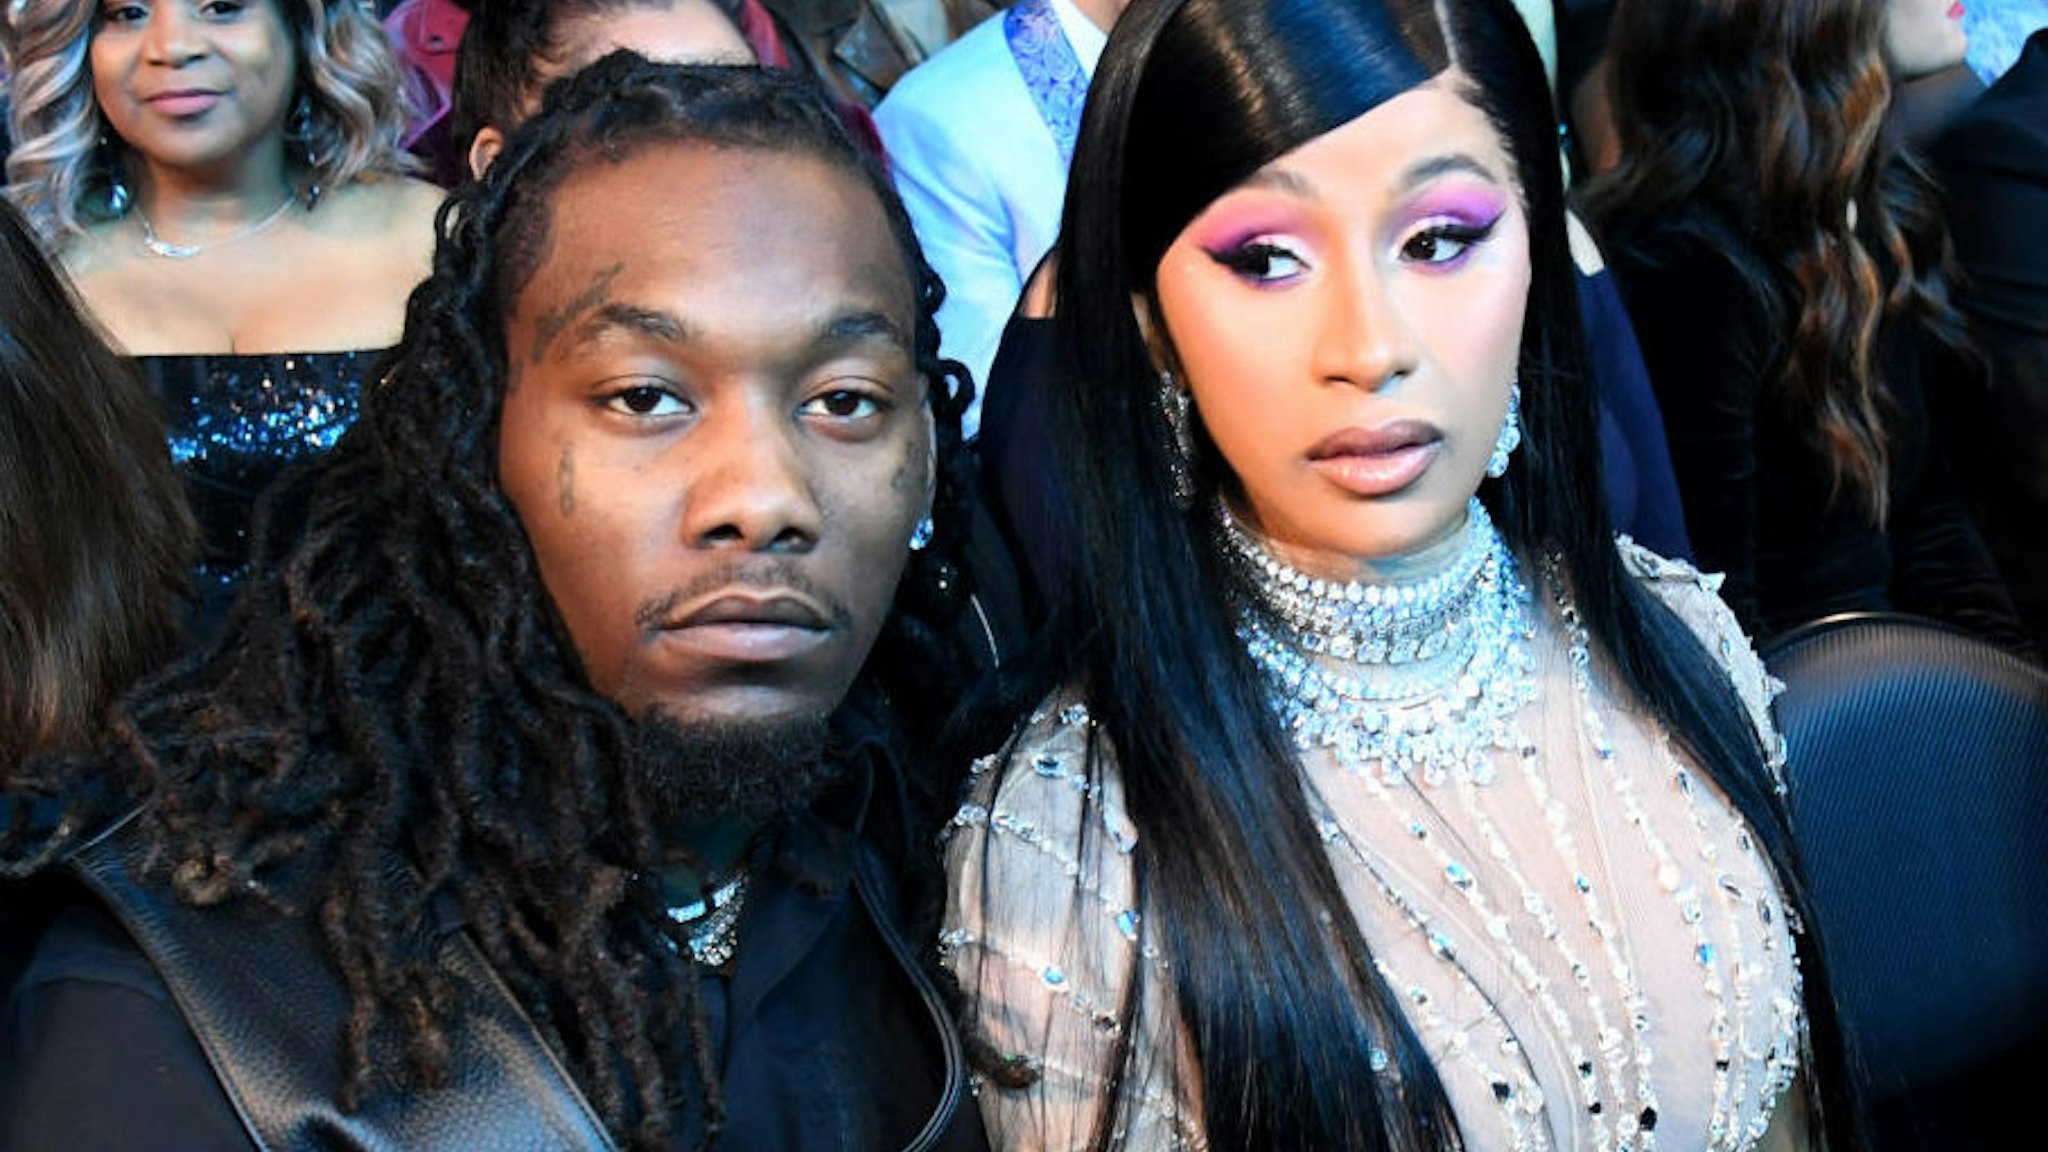 Offset (L) and Cardi B during the 62nd Annual GRAMMY Awards at STAPLES Center on January 26, 2020 in Los Angeles, California